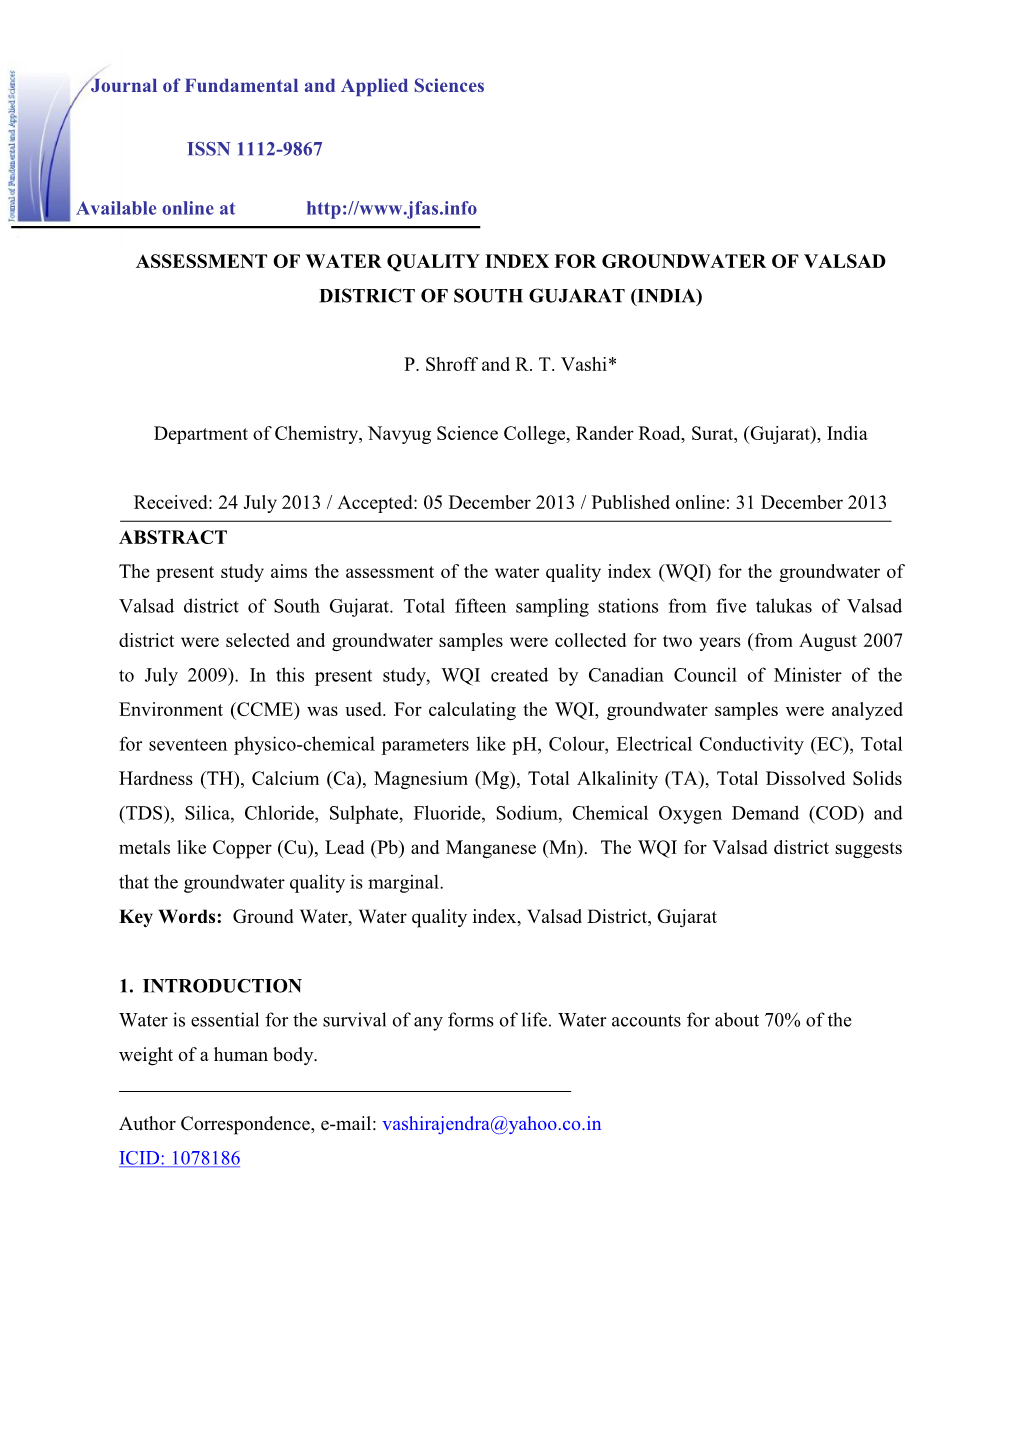 Assessment of Water Quality Index for Groundwater of Valsad District of South Gujarat (India)